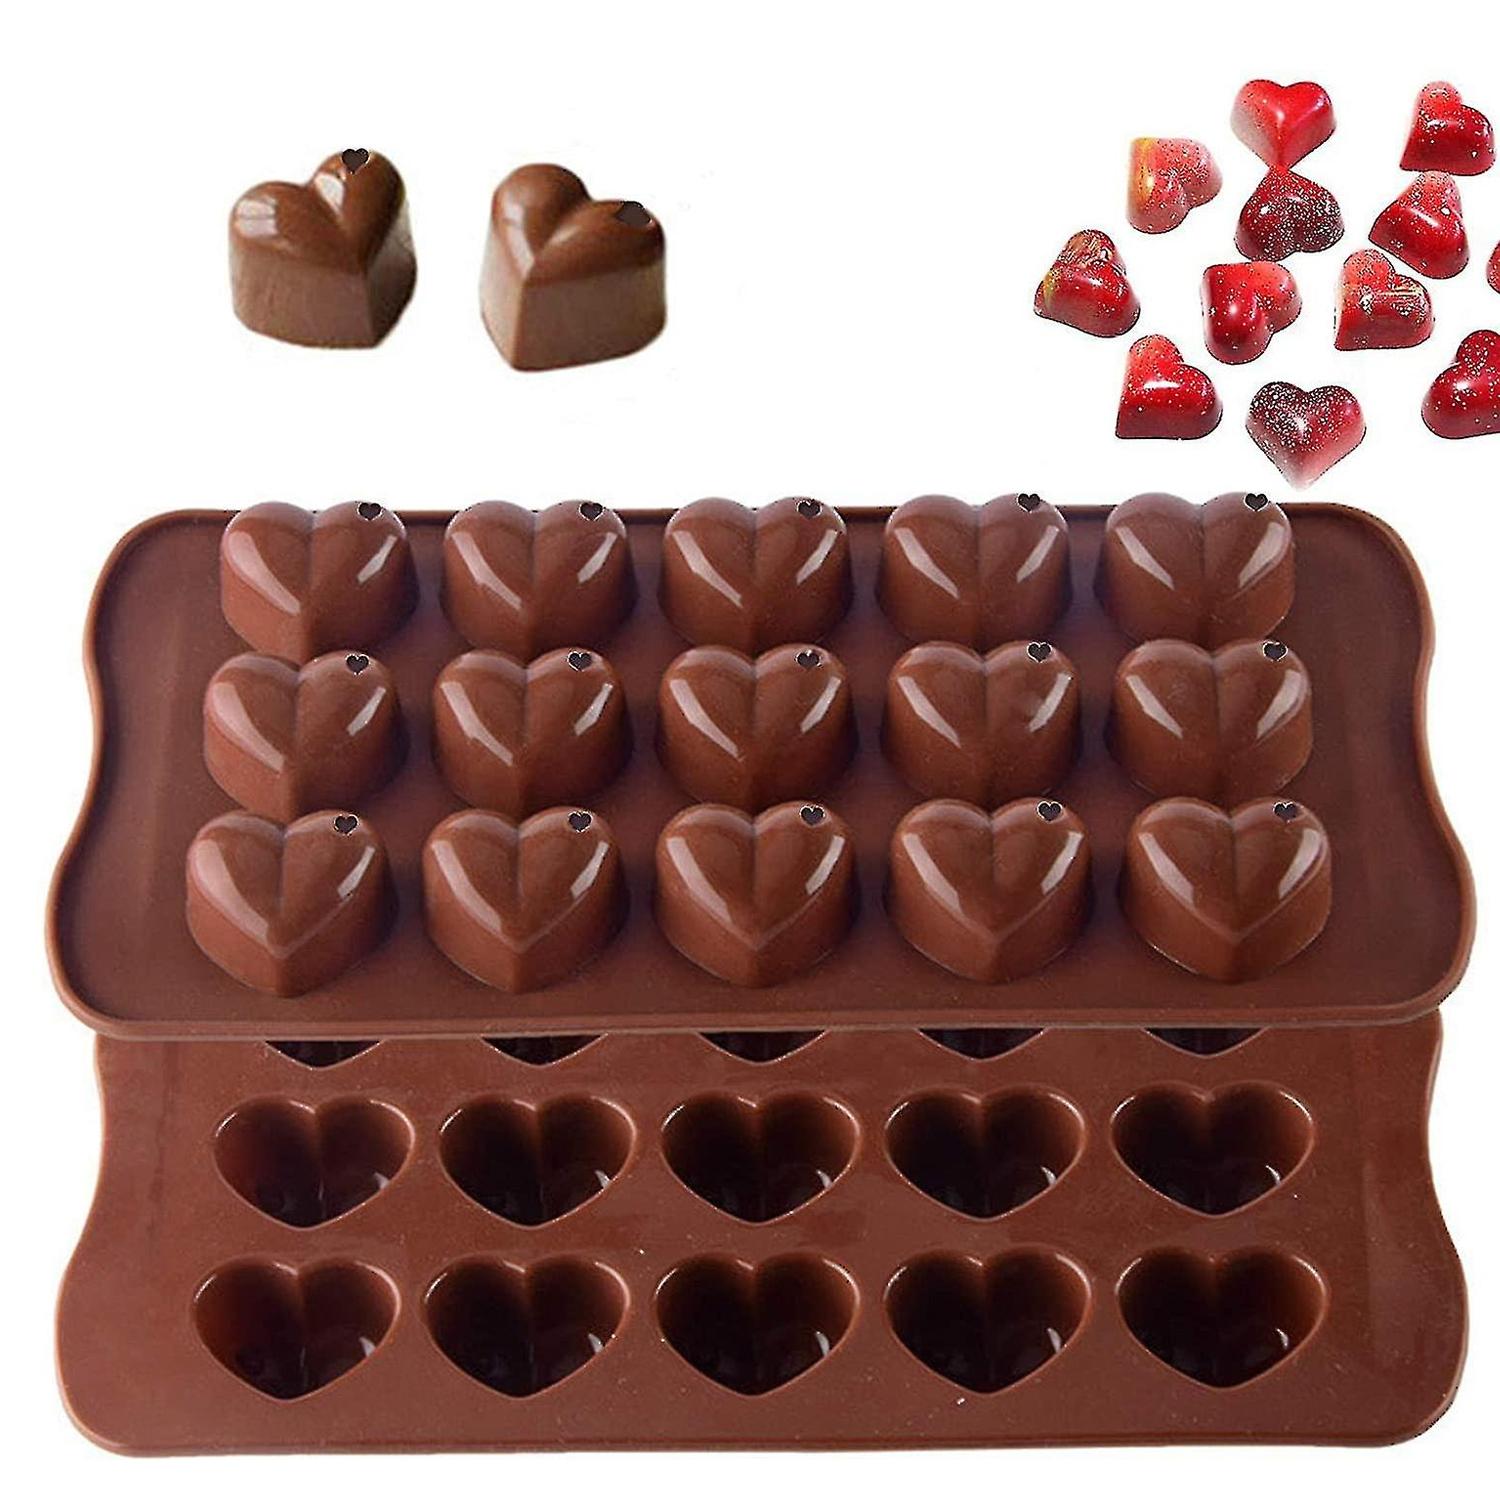 SCM0005 CHOCOLATE SILICONE MOULD HEART